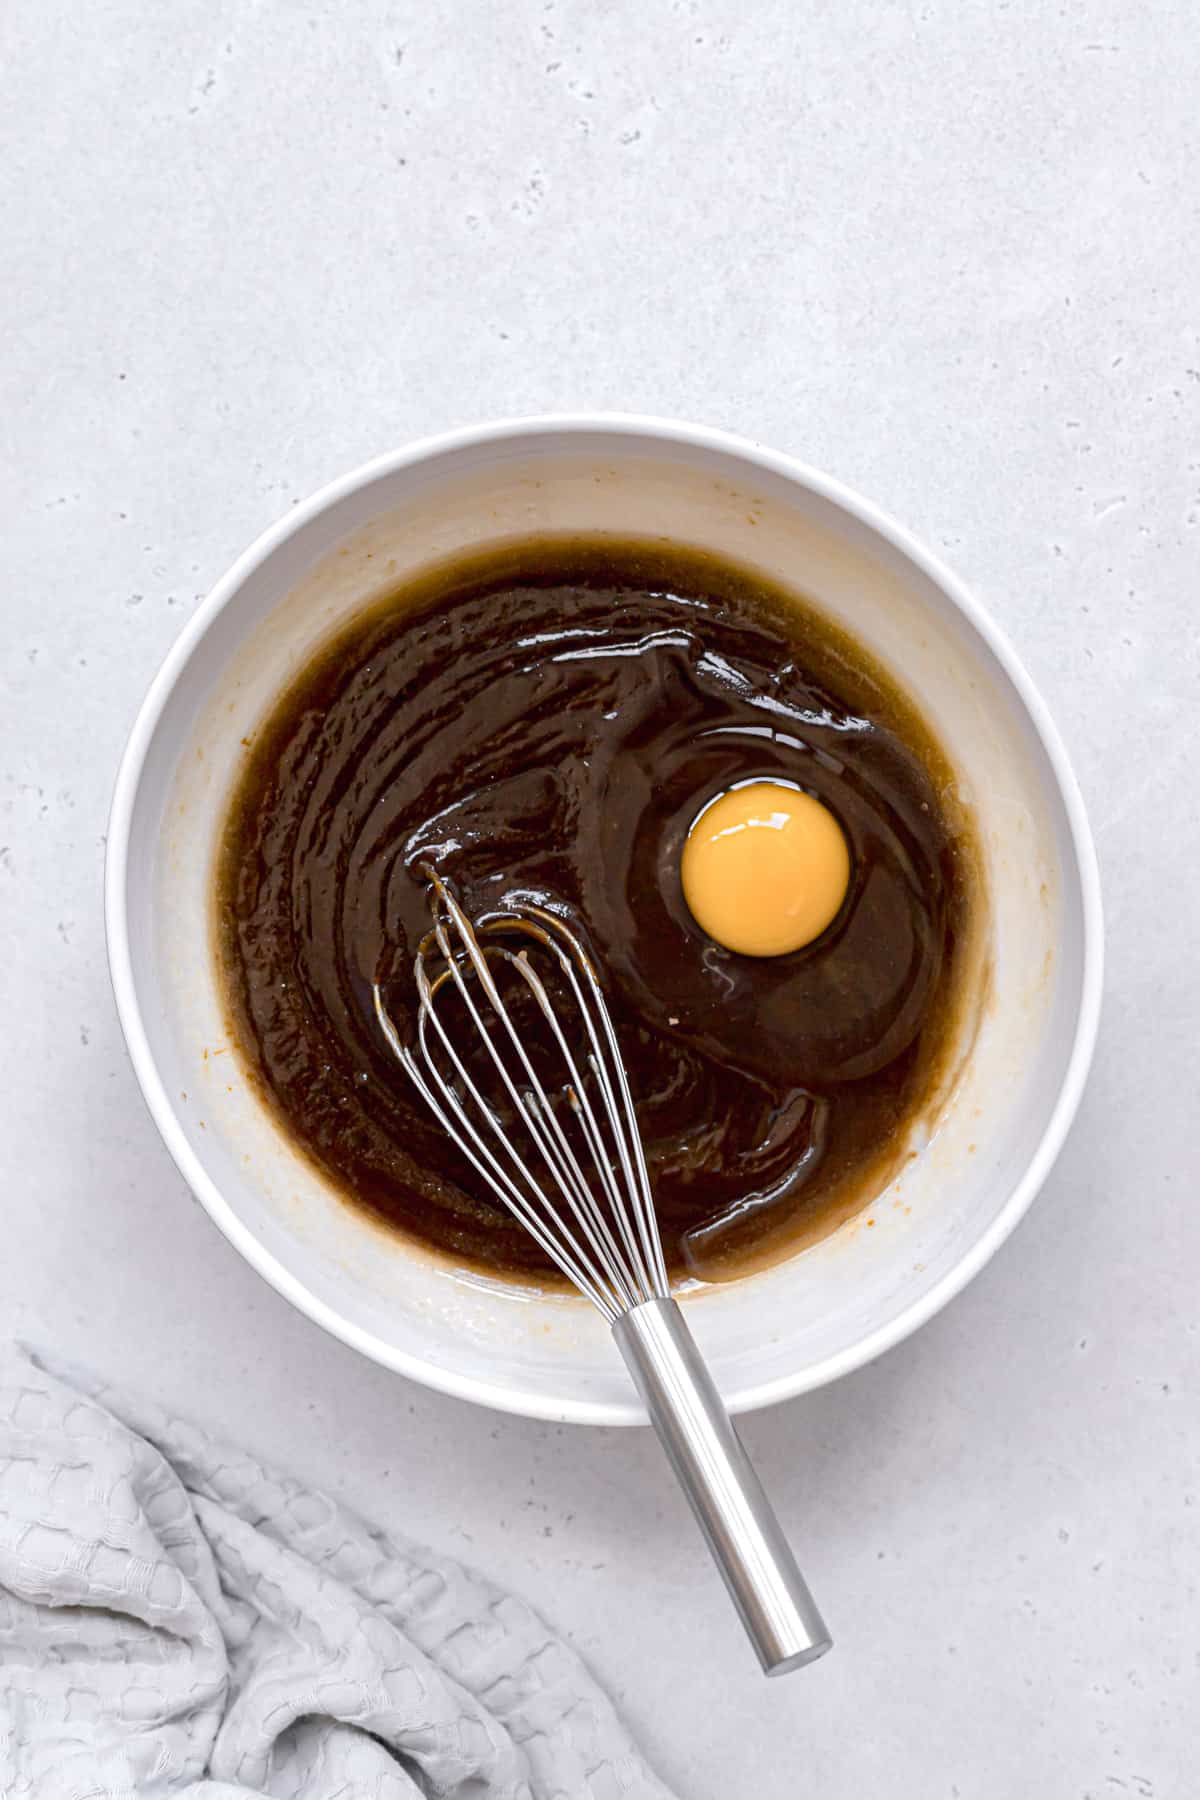 egg being whisked into wet ingredients.